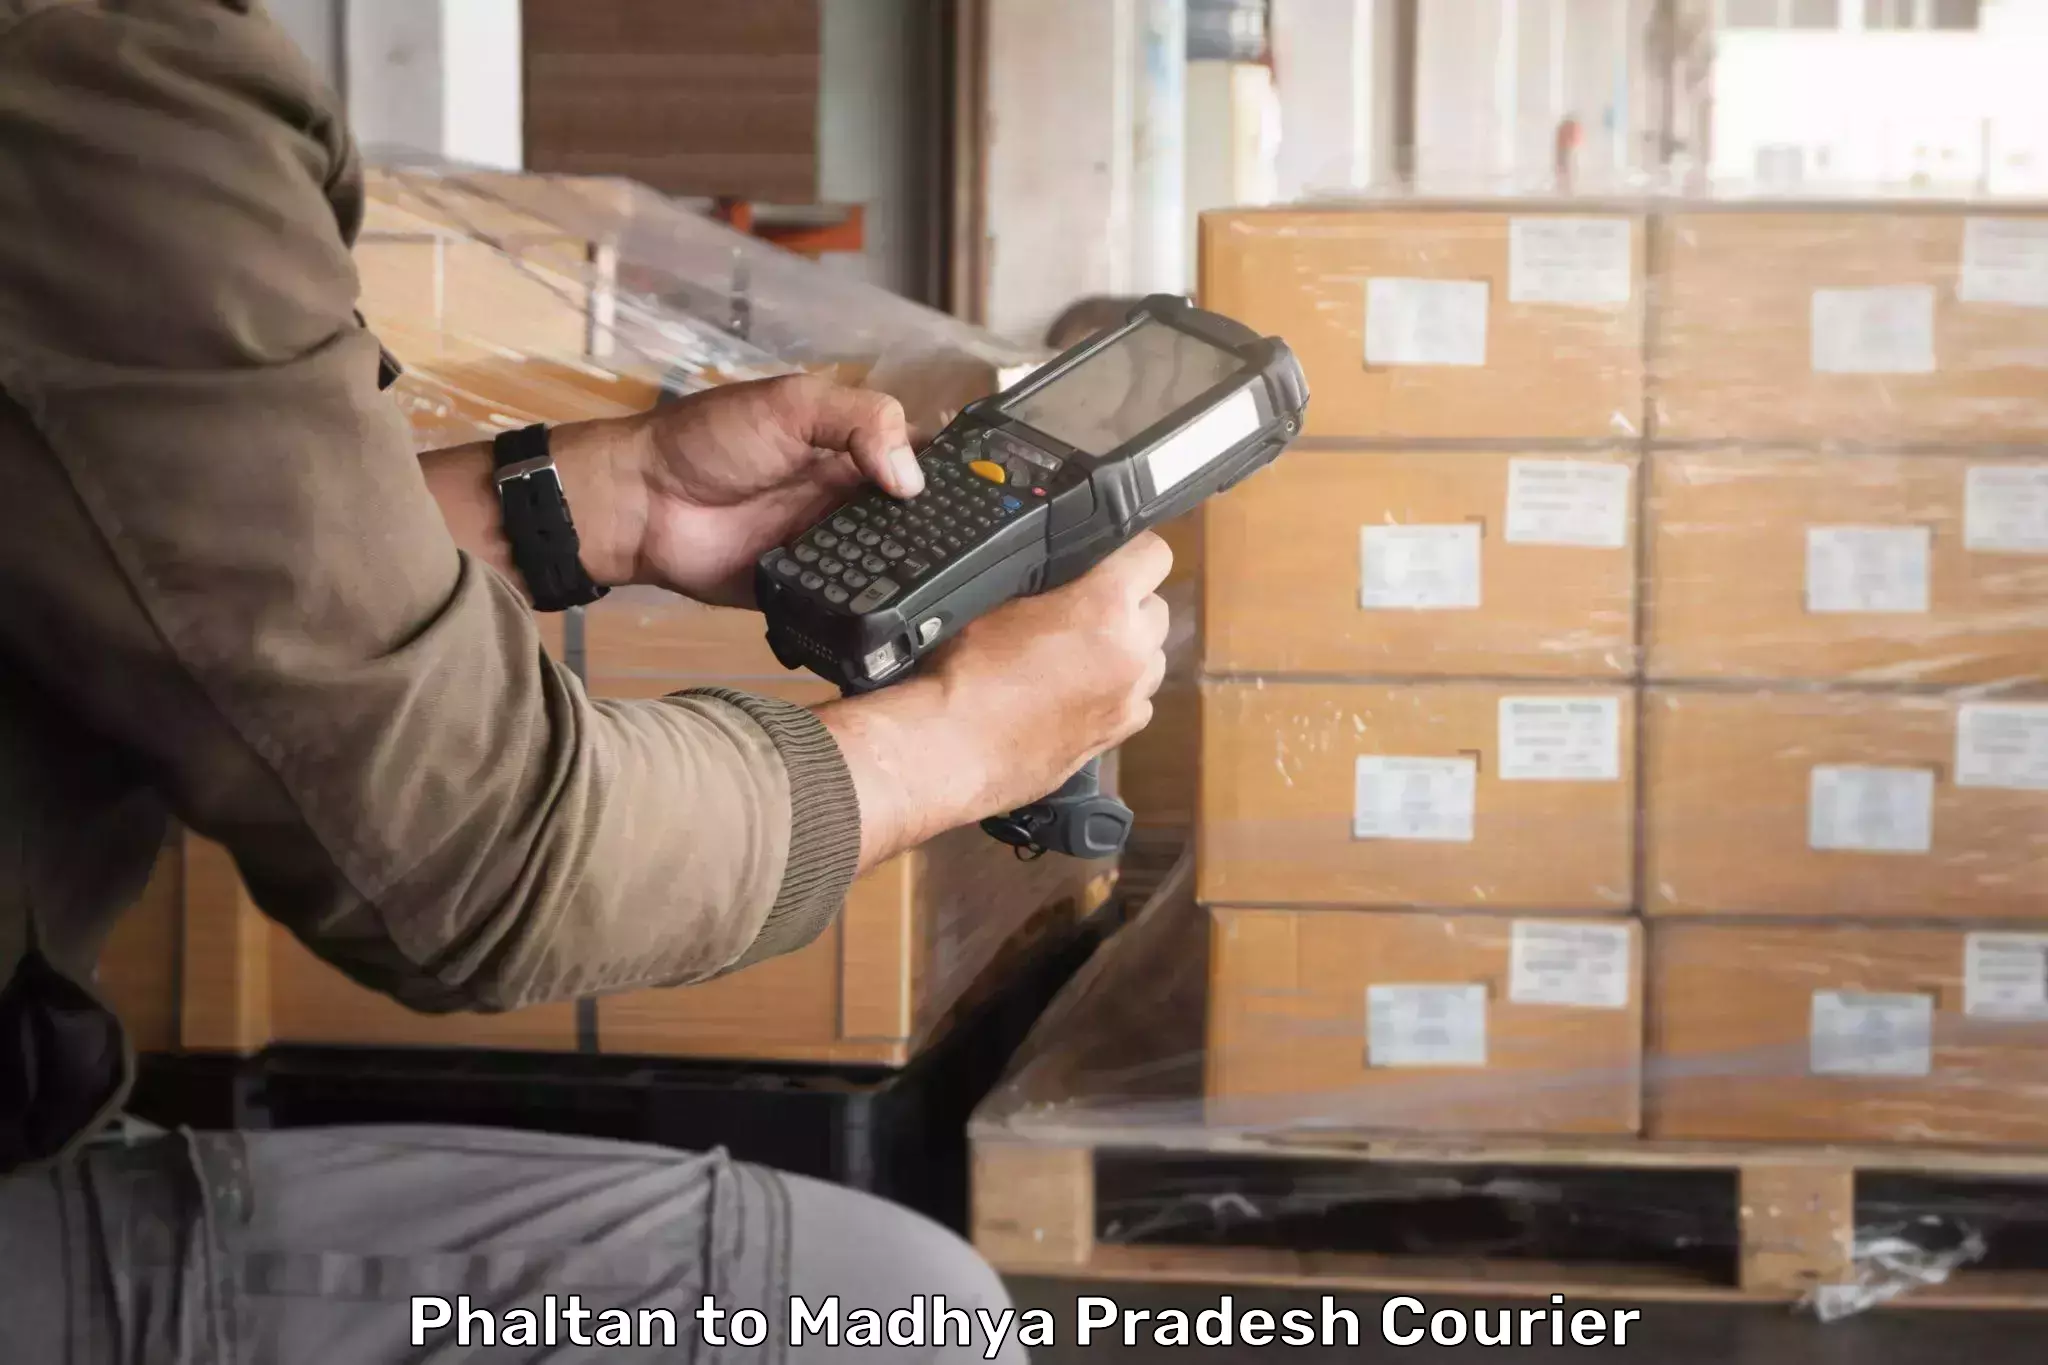 Cash on delivery service Phaltan to Sausar